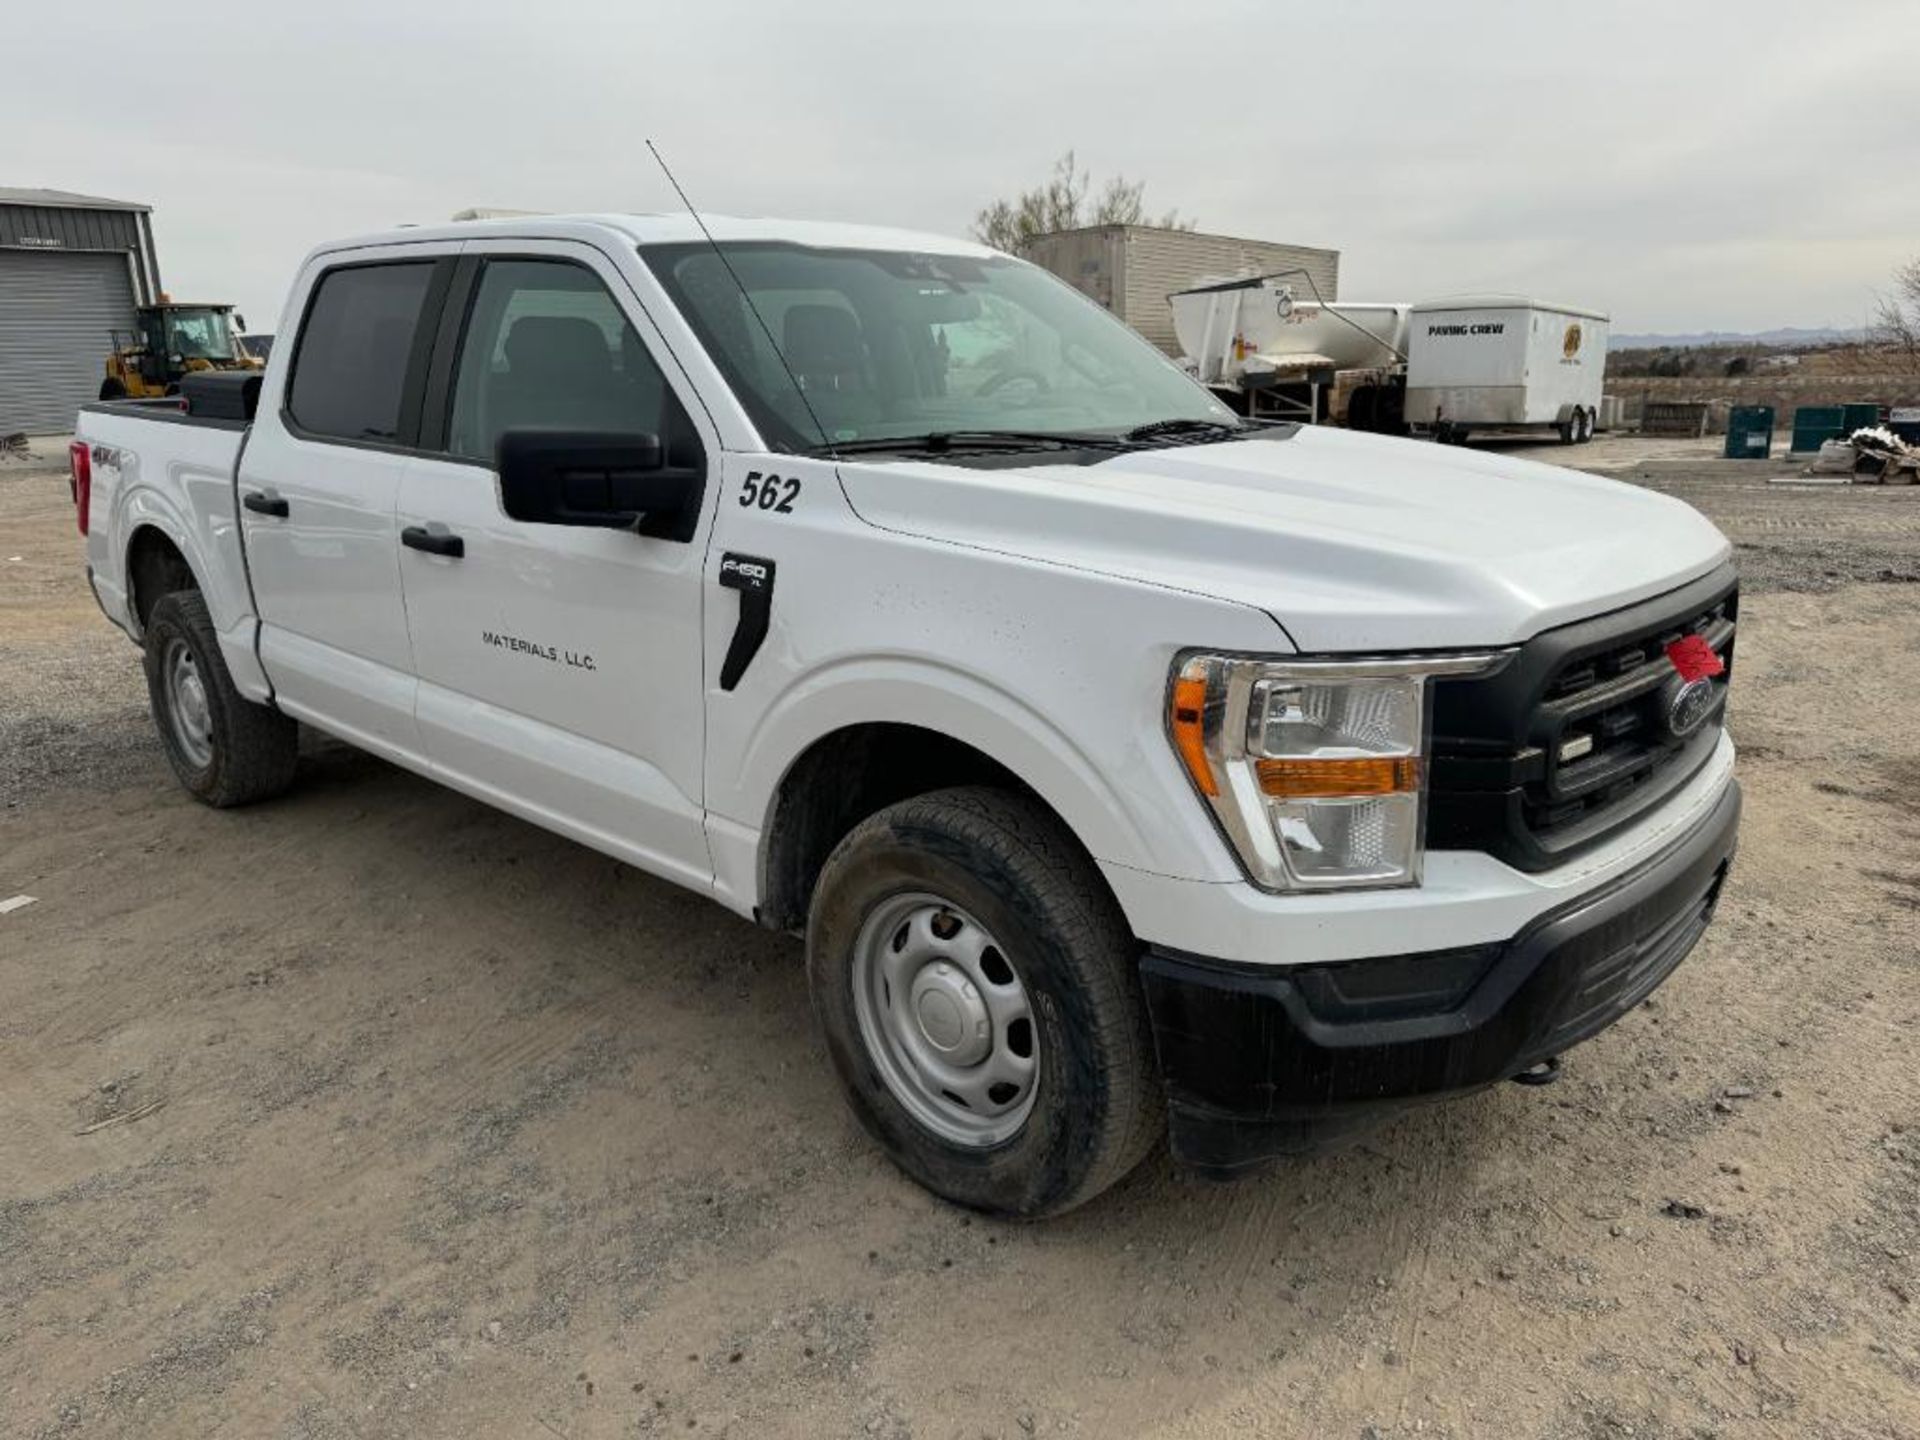 2021 Ford F150 XL Crew Cab 4X4 Truck - Image 5 of 19